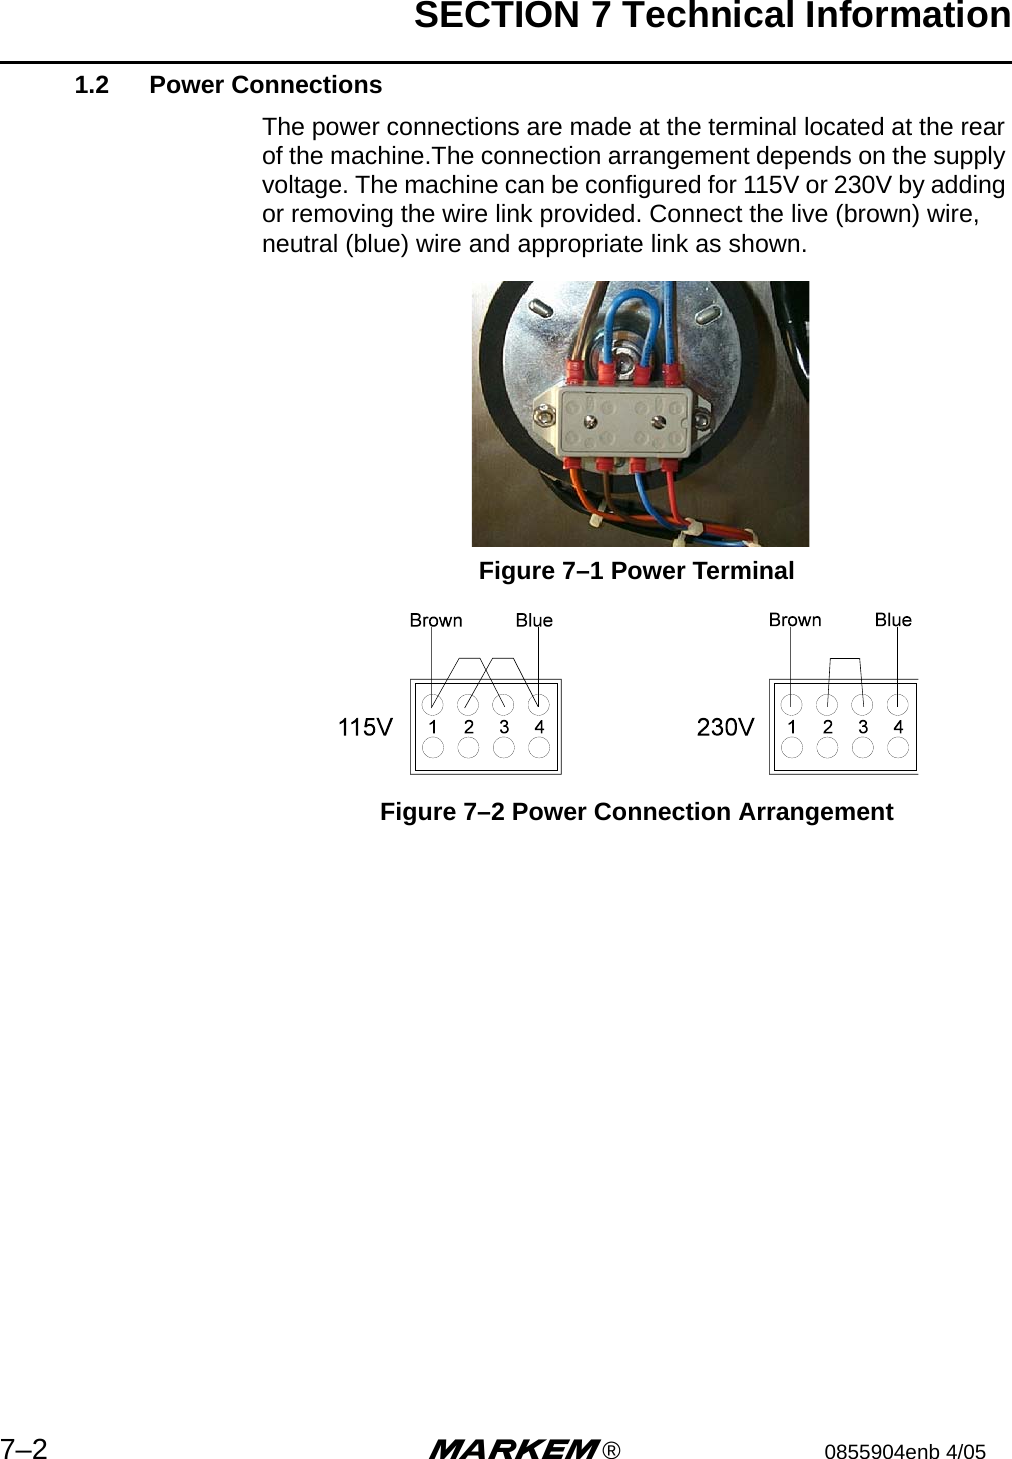 SECTION 7 Technical Information7–2 m®0855904enb 4/05 1.2 Power ConnectionsThe power connections are made at the terminal located at the rear of the machine.The connection arrangement depends on the supply voltage. The machine can be configured for 115V or 230V by adding or removing the wire link provided. Connect the live (brown) wire, neutral (blue) wire and appropriate link as shown.  Figure 7–1 Power TerminalFigure 7–2 Power Connection Arrangement